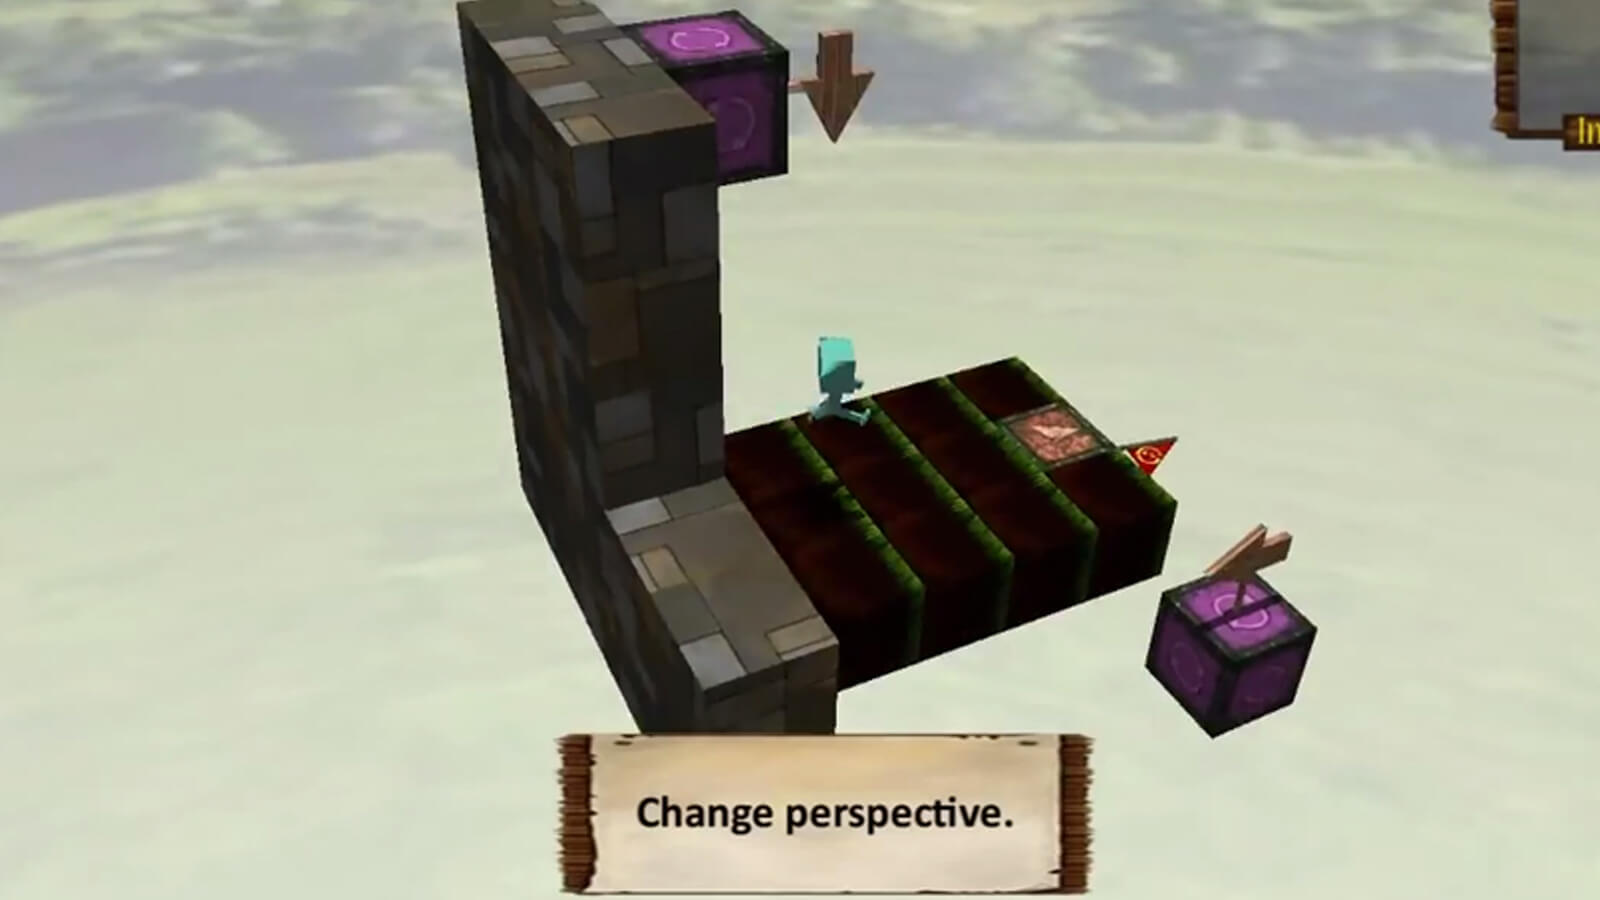 A character runs along the recently upturned wall face. The words "Change Perspective" appear on screen.